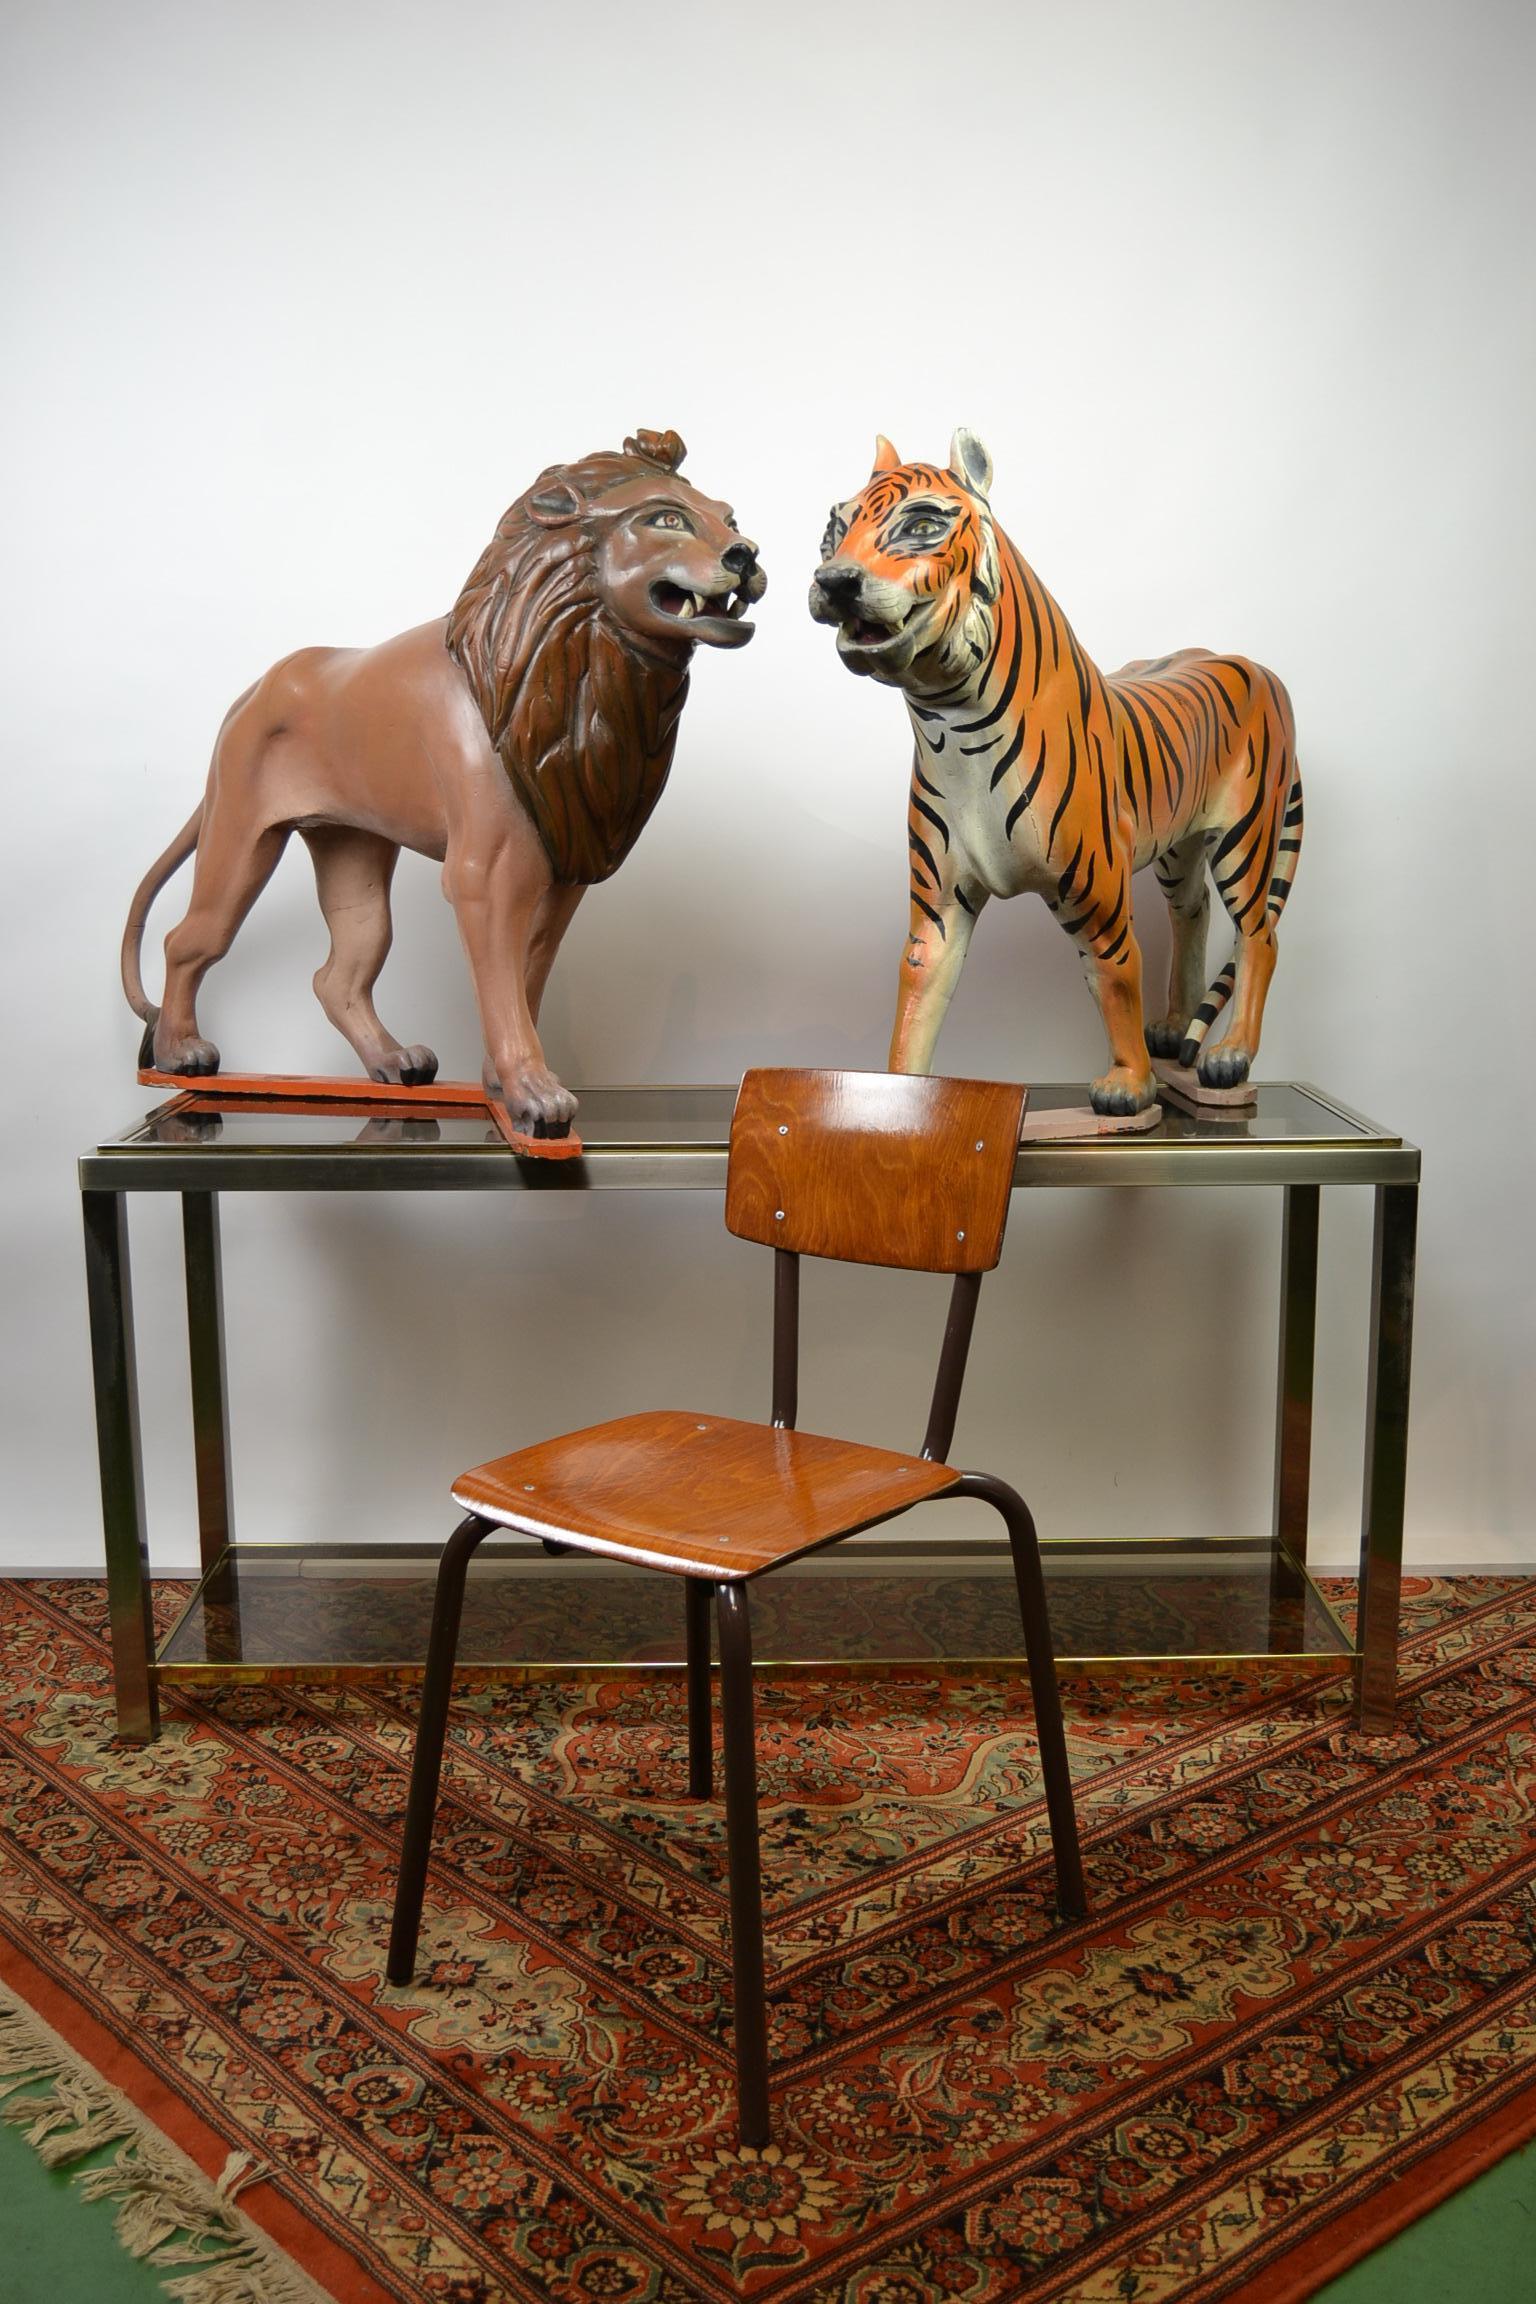 Stylish and elegant wooden sculptures of a lion and a tiger.
These wild animal statues, animal figures
were placed on a carousel or fairground attraction as decoration
like the centre of a roundabout and not as a fairground ride on animal.
these